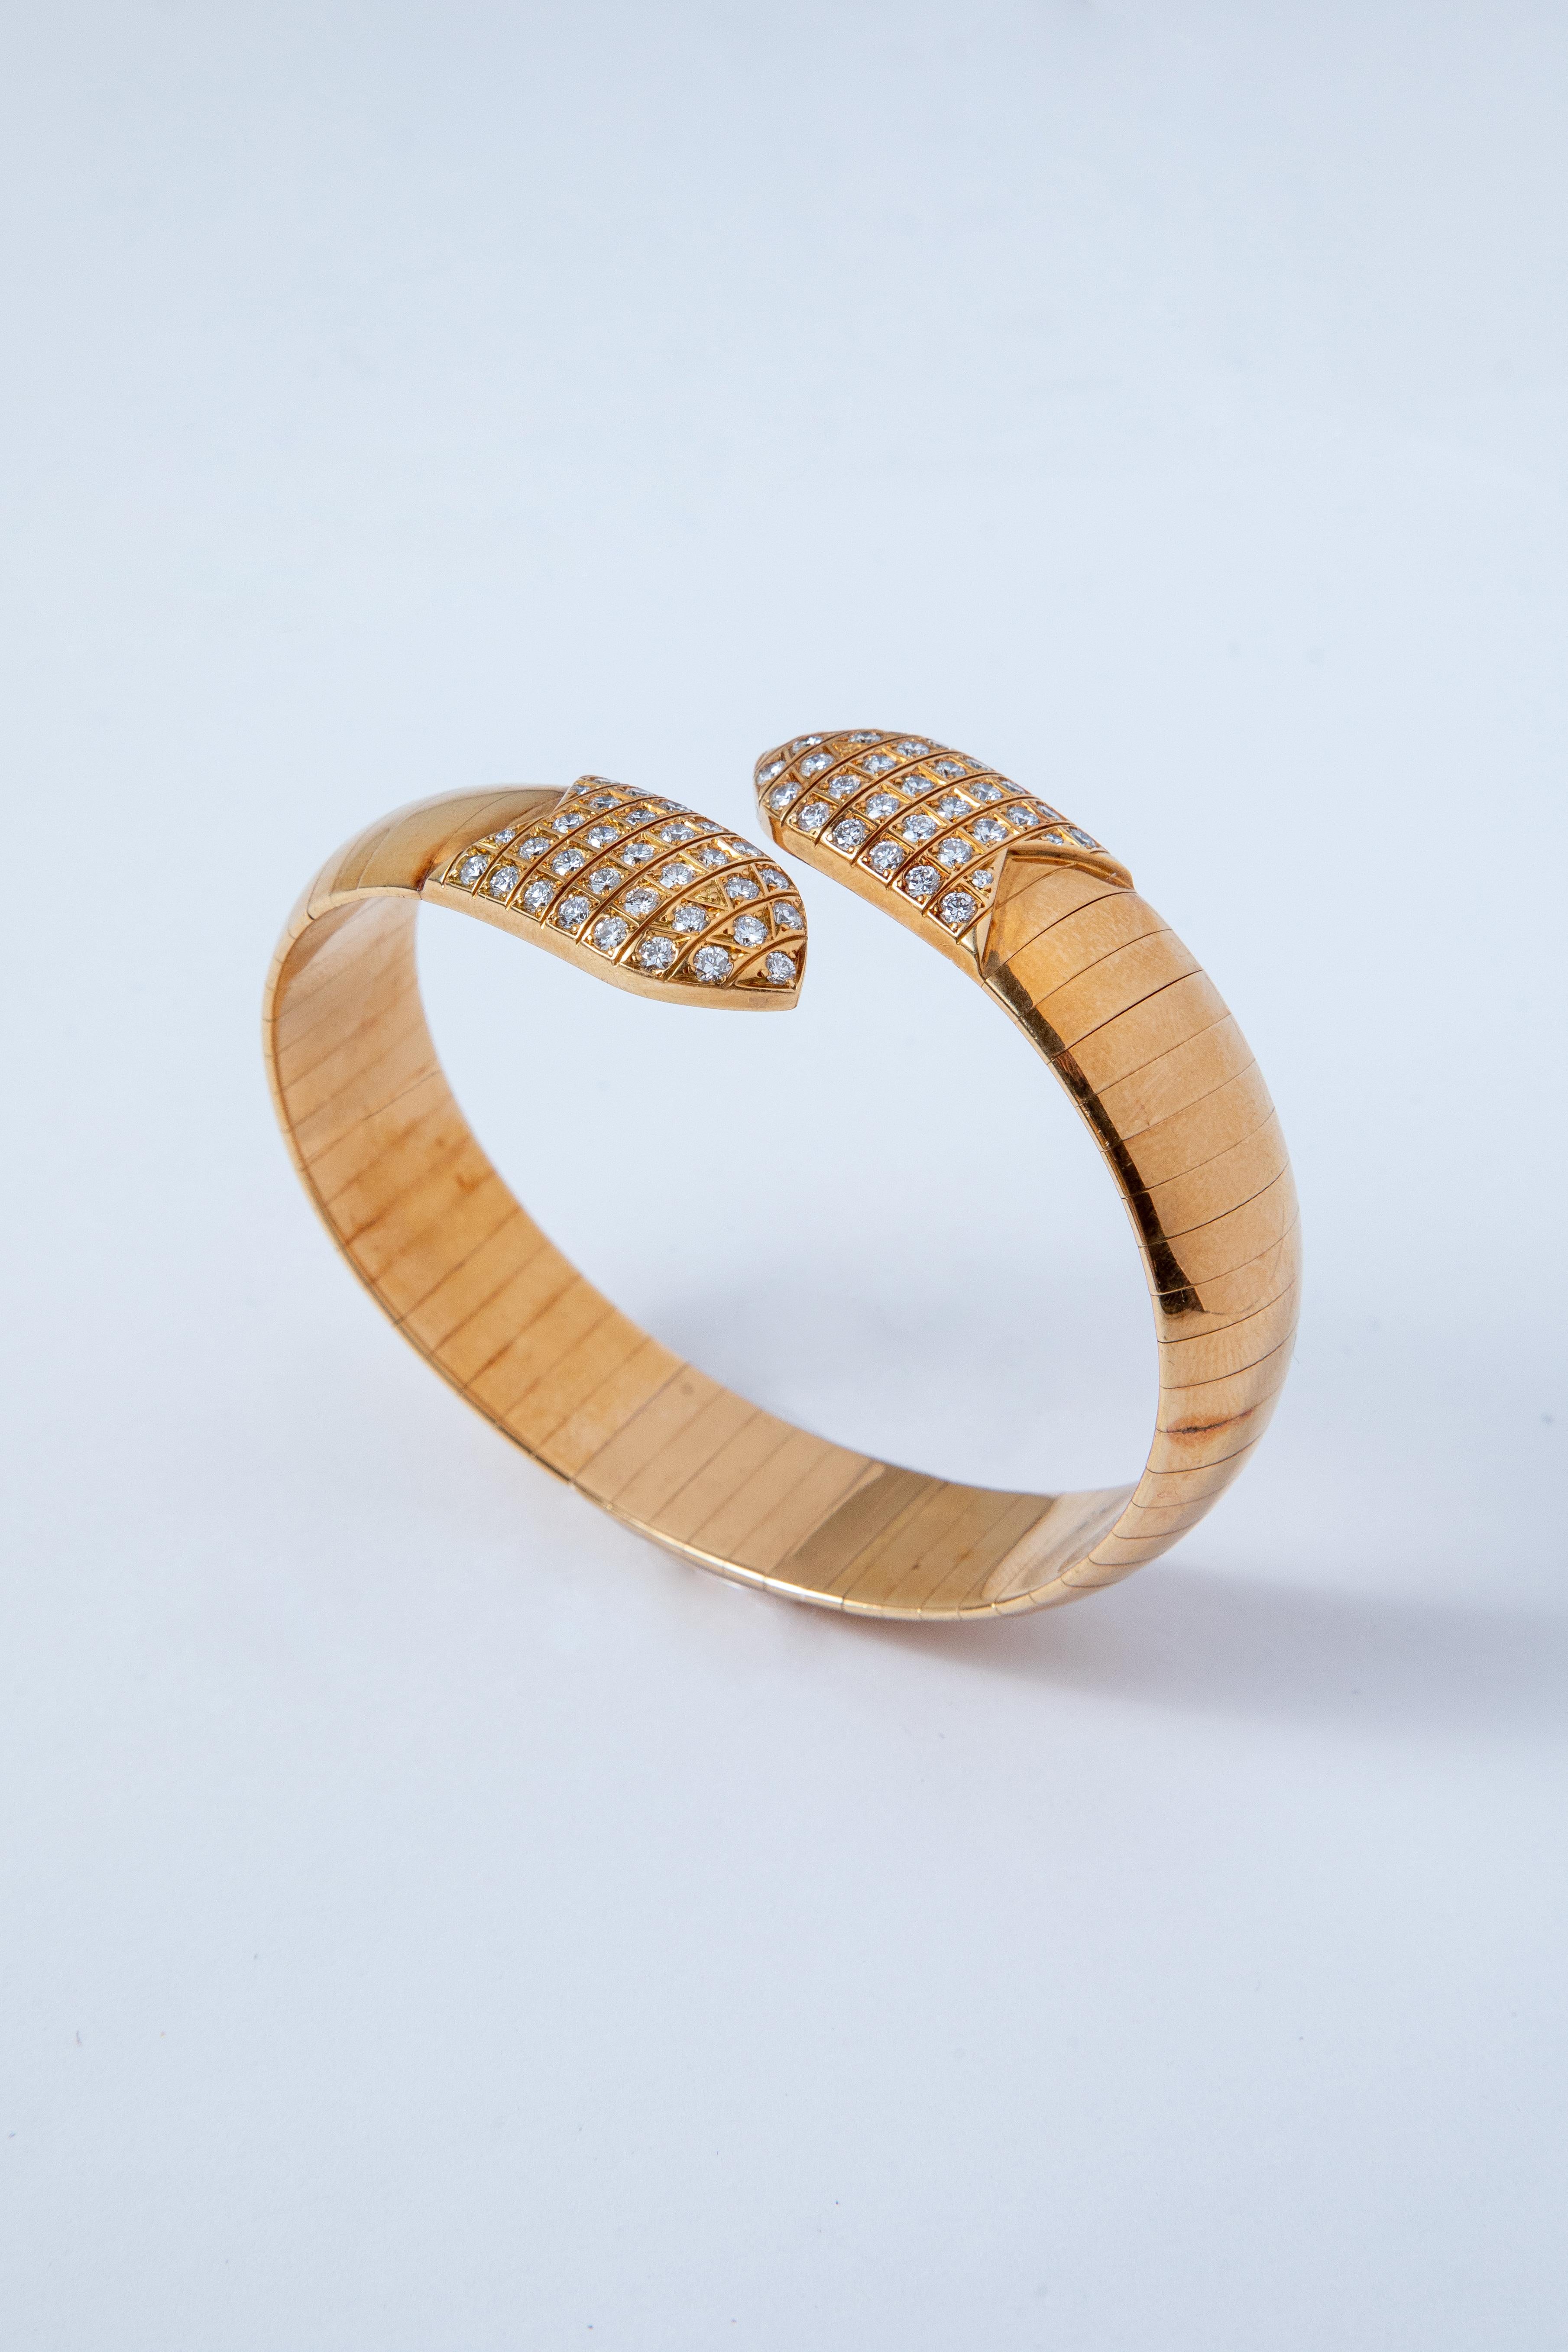 Chaumet Bracelet and Ring made in 18k Yellow Gold set at each end with a grid of brilliant-cut Diamonds

Signed Chaumet Paris and numbered

Wrist circumference: 17.5 cm
Ring size: 5 